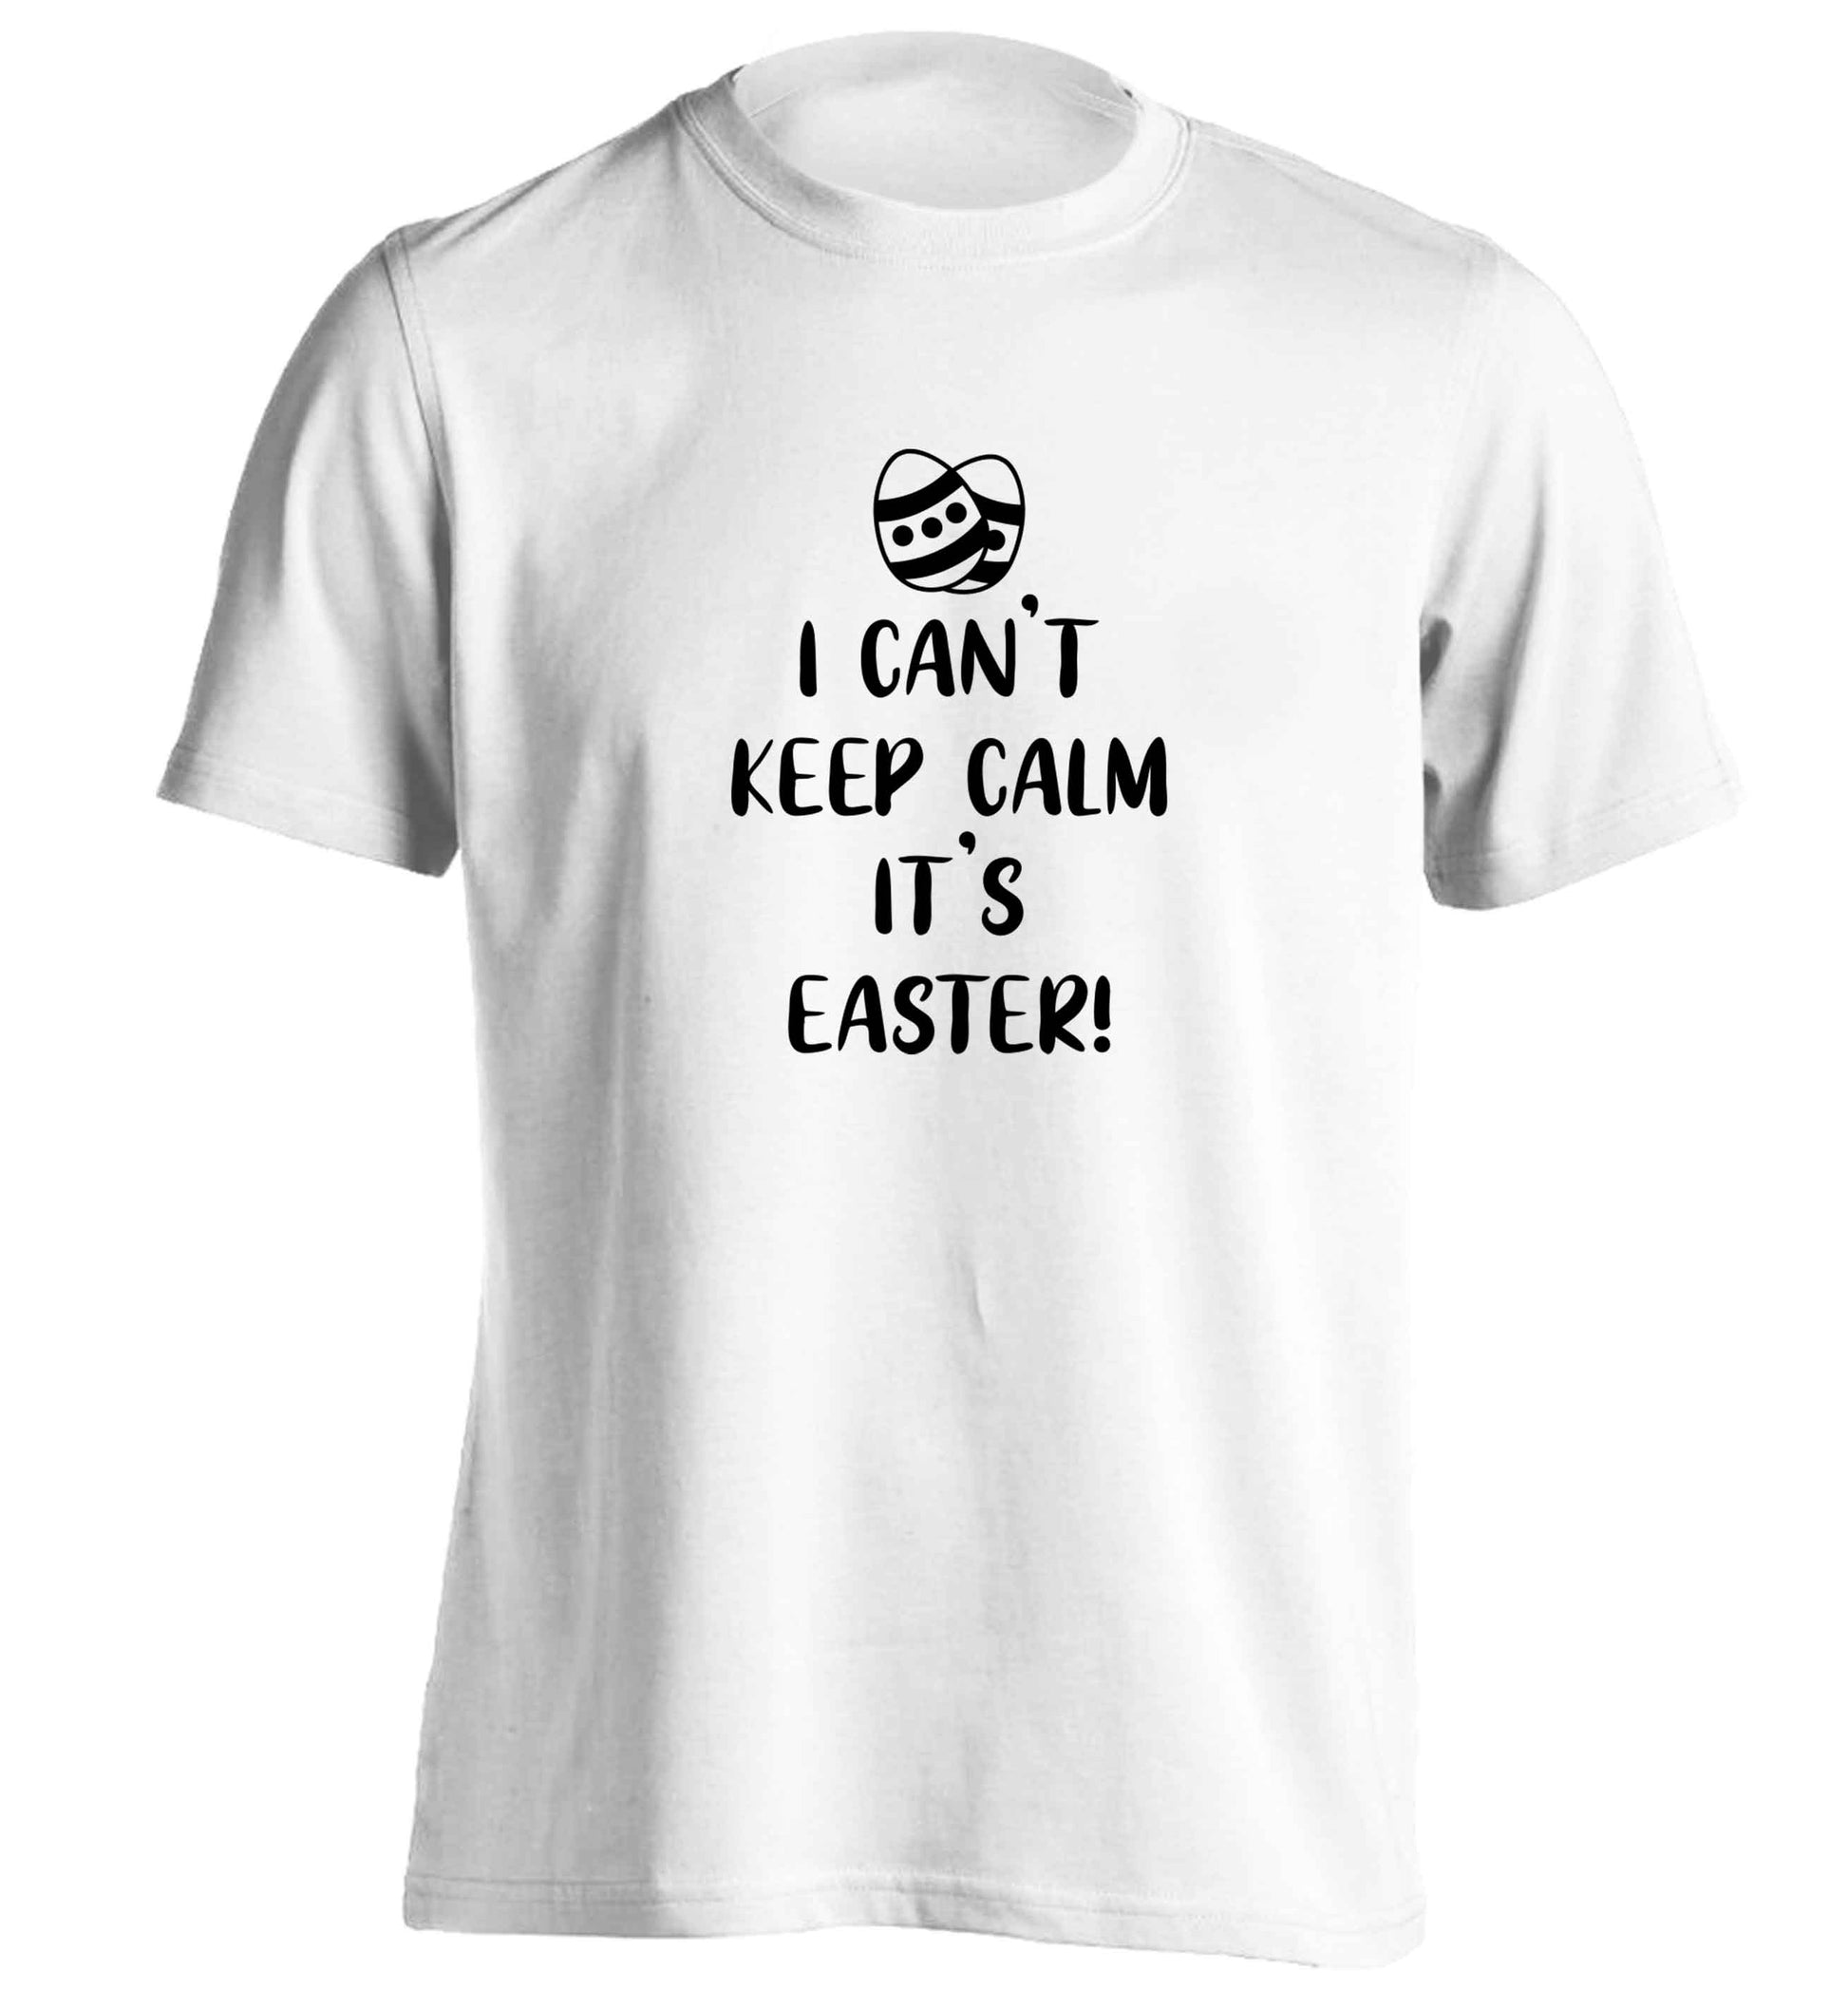 I can't keep calm it's Easter adults unisex white Tshirt 2XL